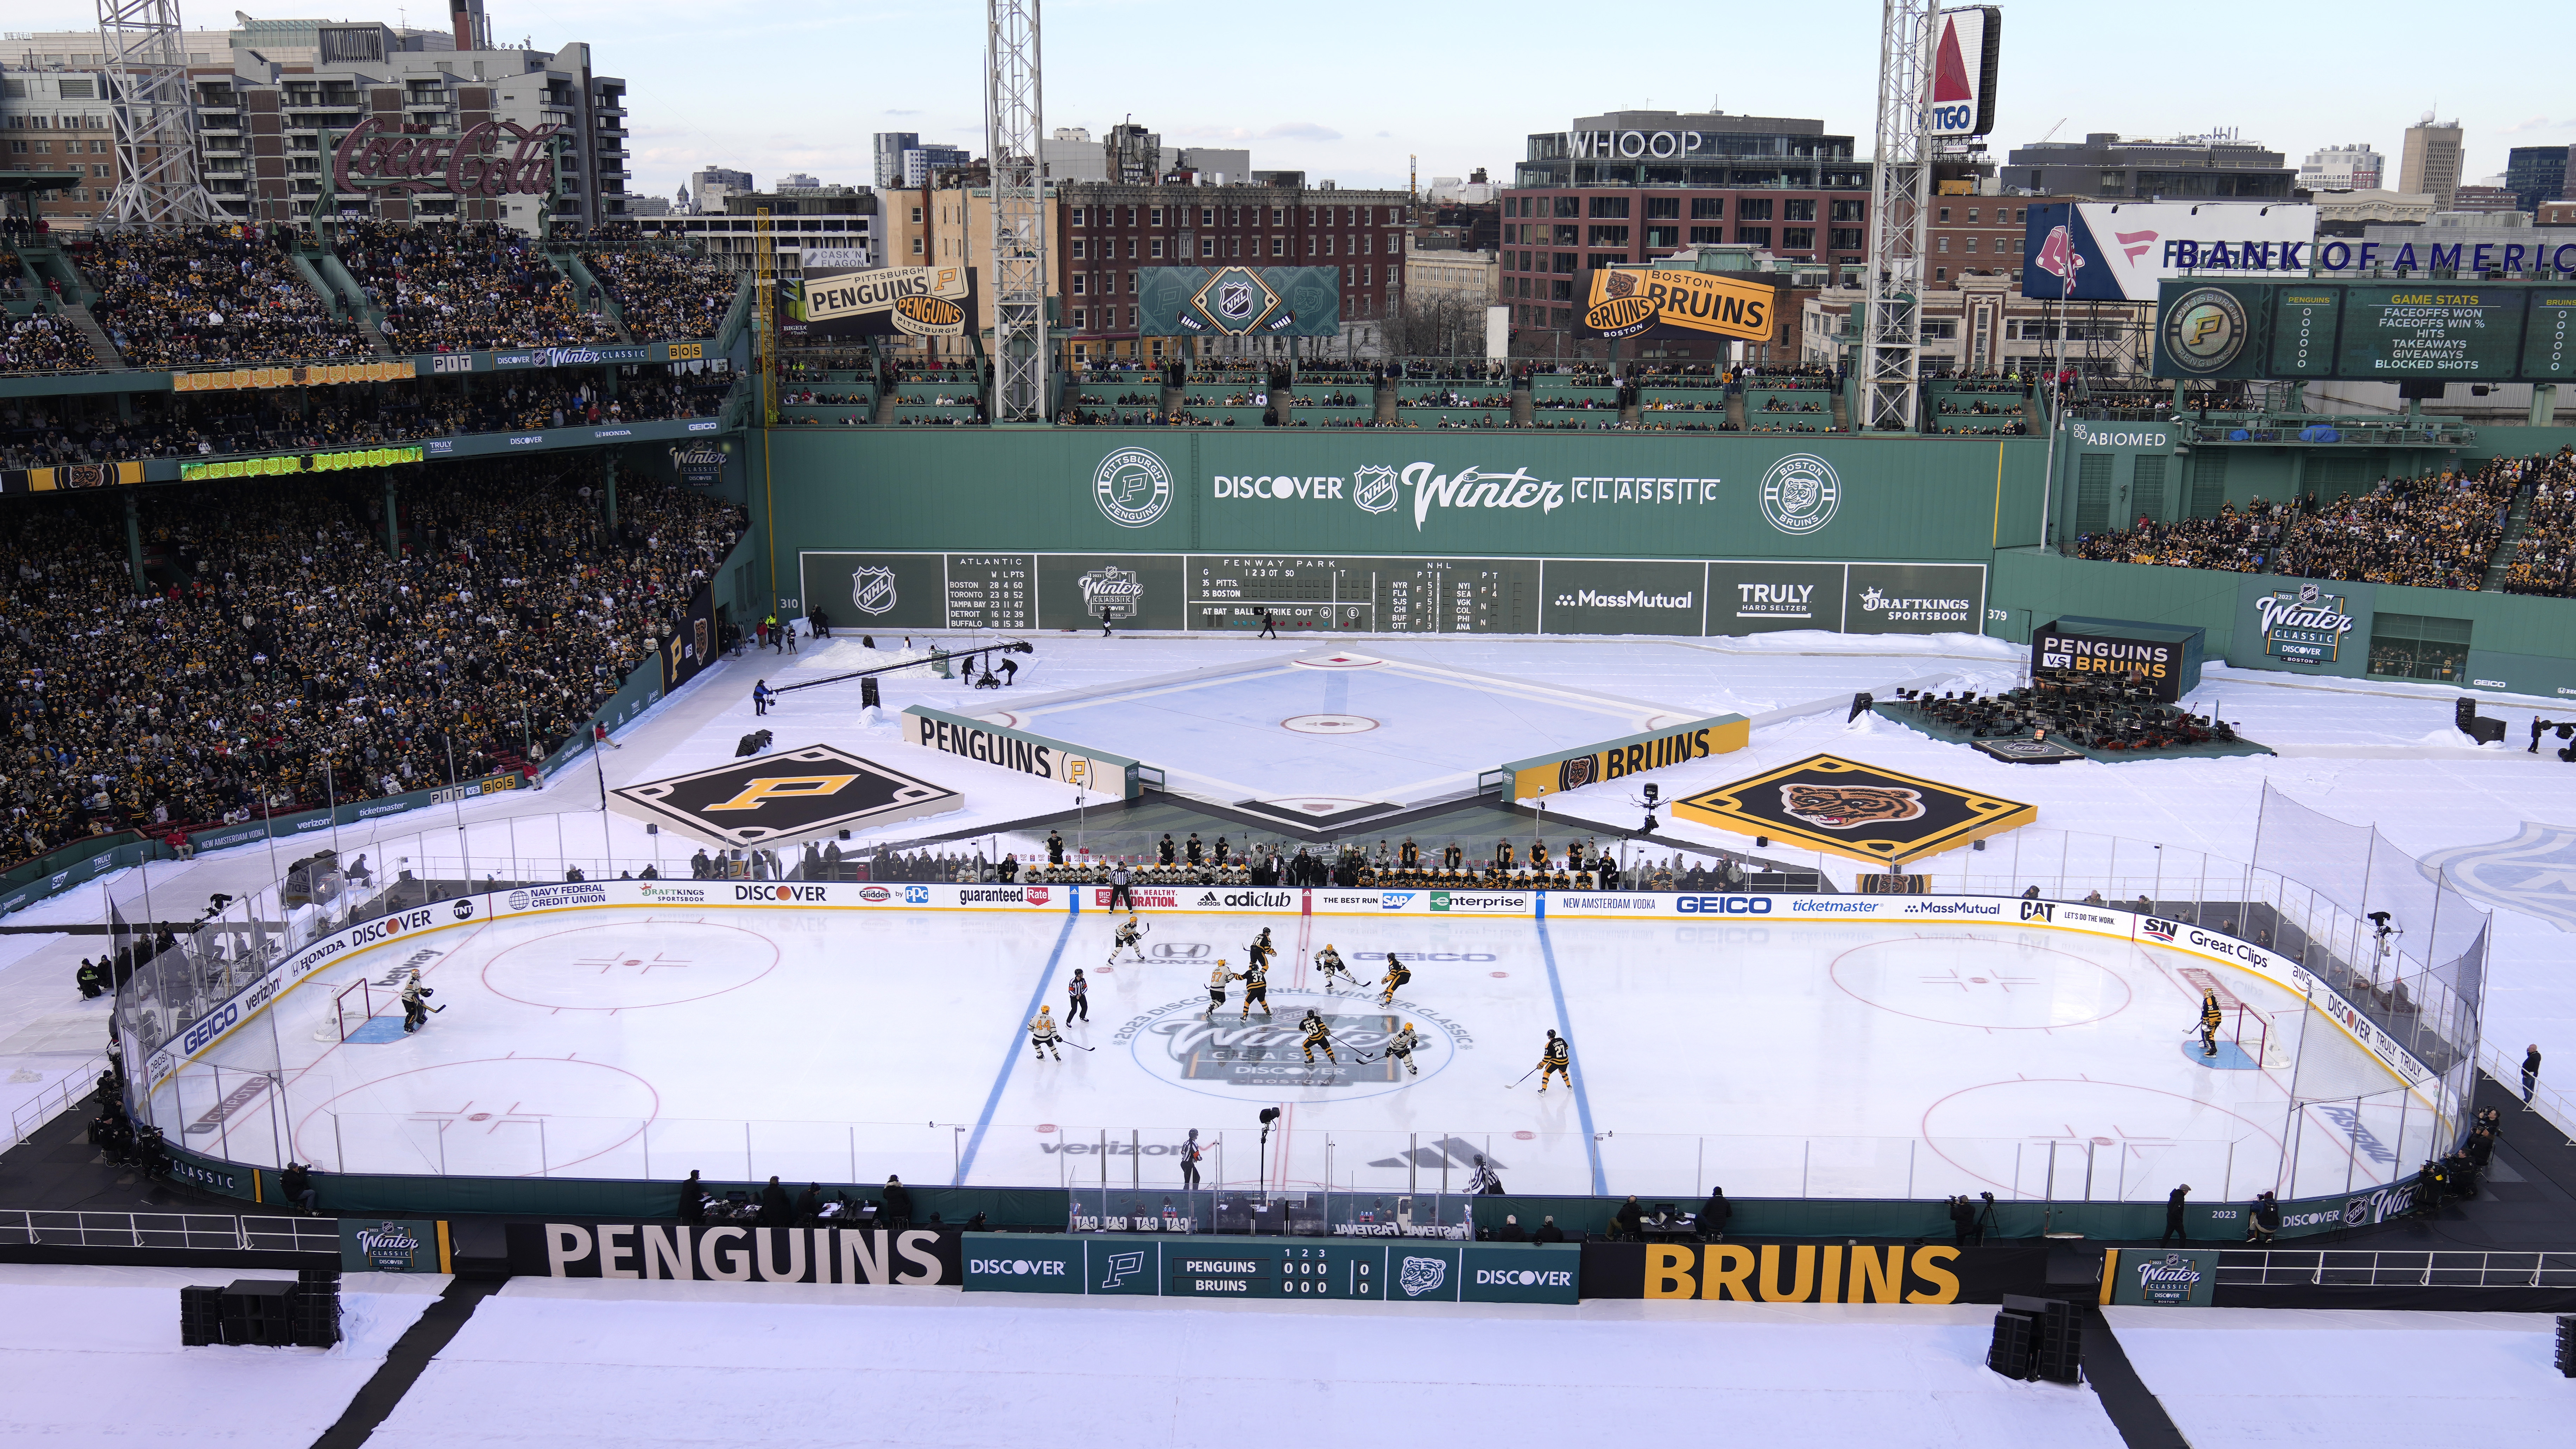 Bruins, Penguins reveal logos for Winter Classic at Fenway Park